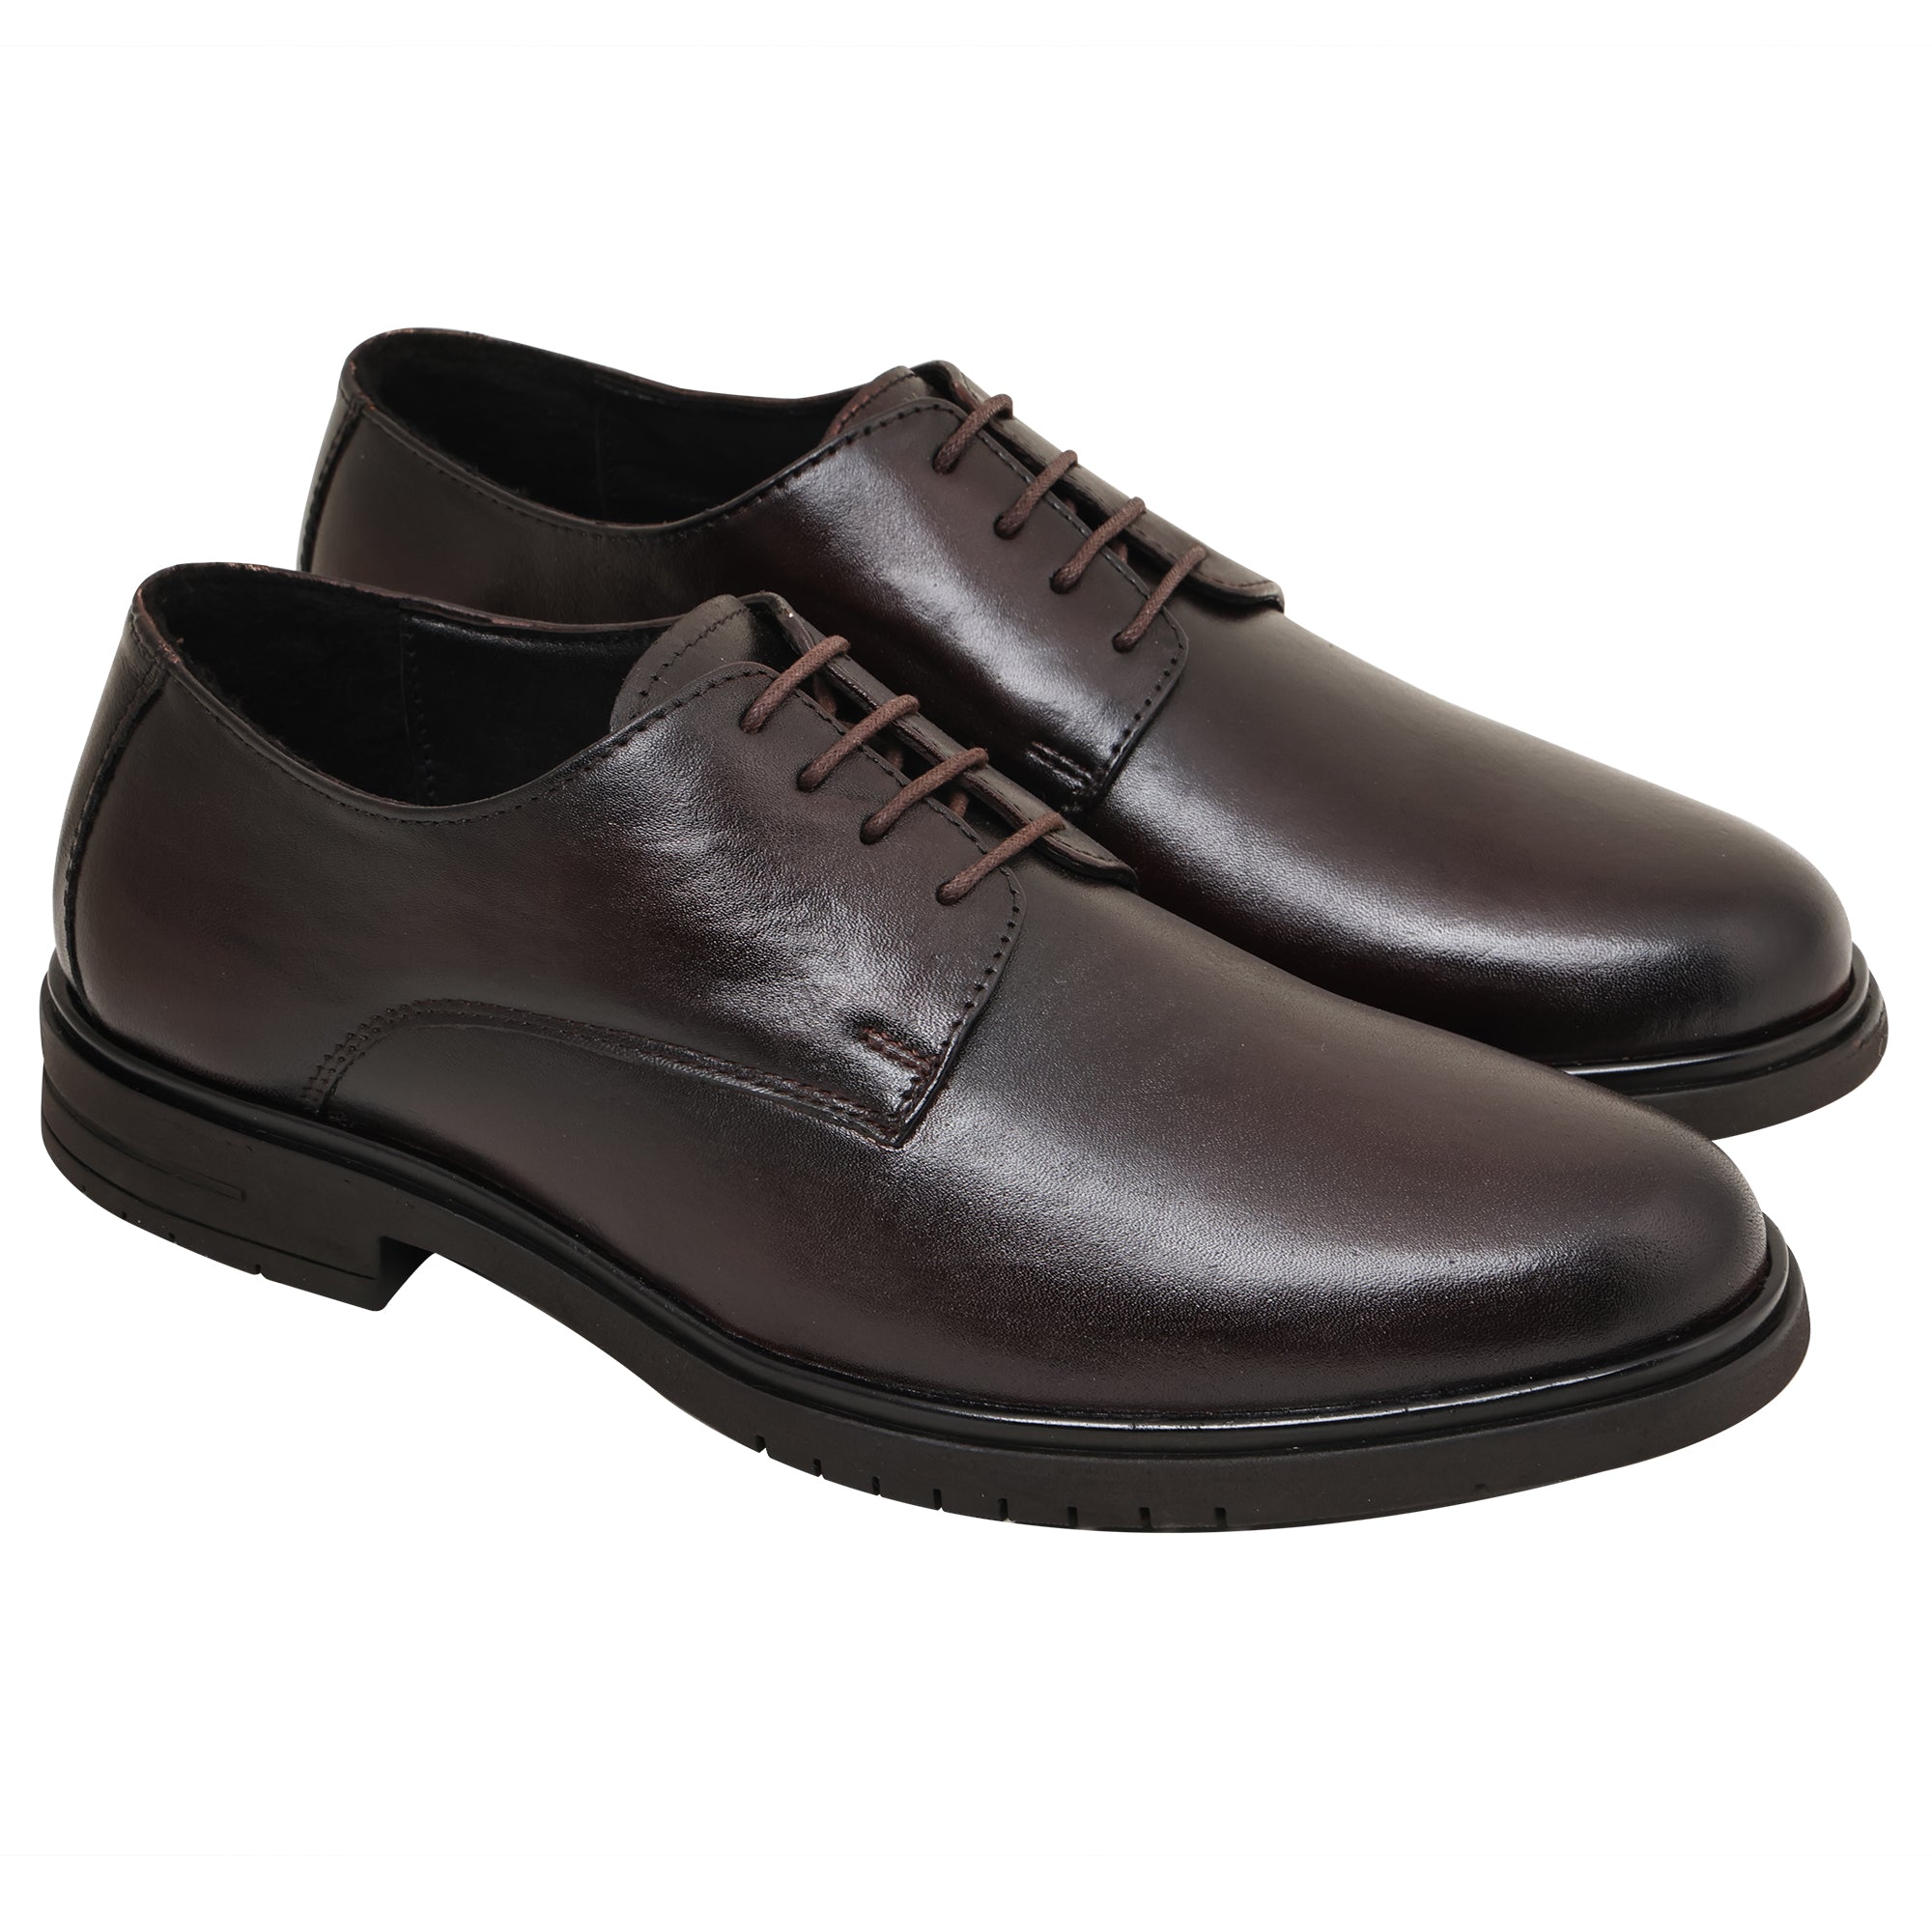 Handcrafted Italian Napa Leather Formal Shoes (LB23A)